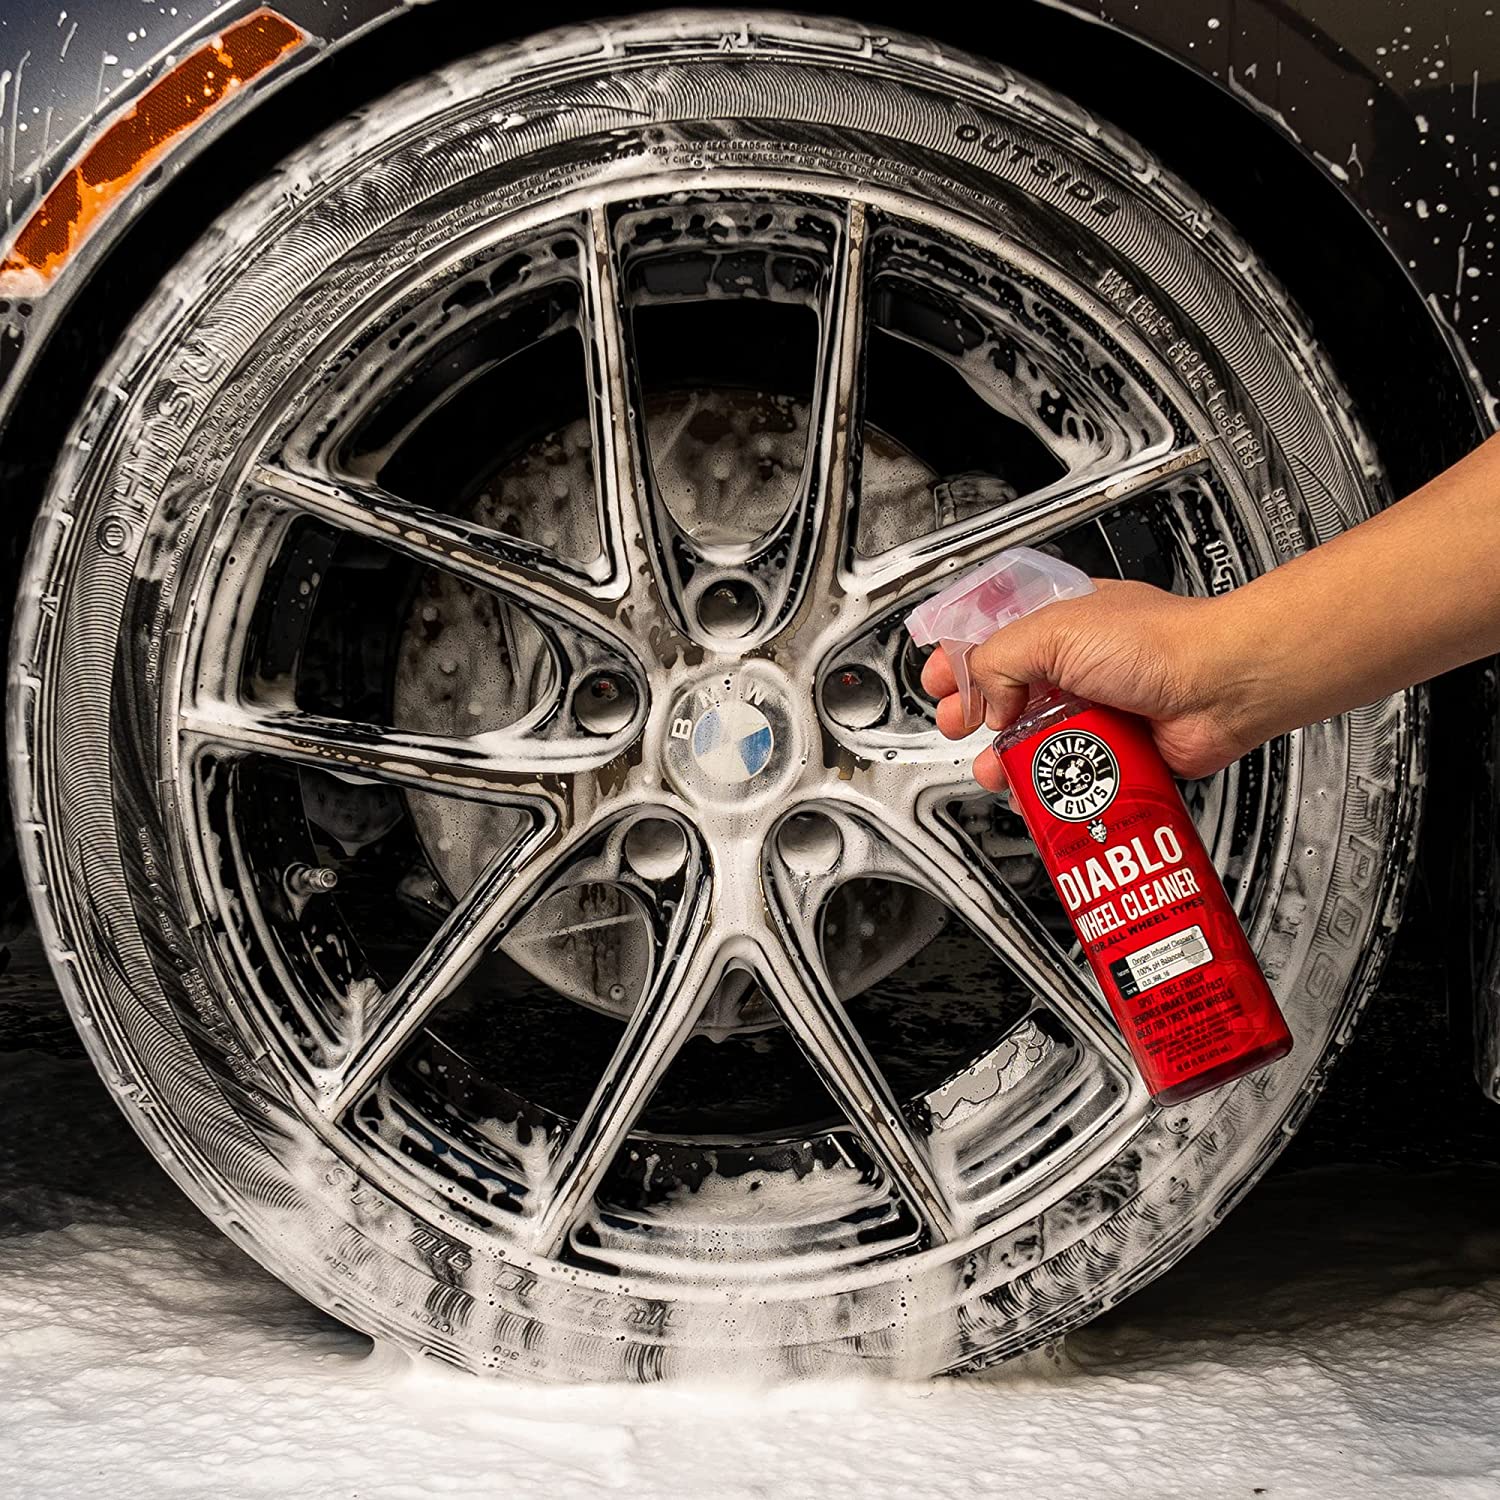 Pressure Washer Pro Foaming Wash & Dry Kit | Remove Grime, Buildup | Car Detailing | Vehicle Cleaning Kit | Chemical Guys